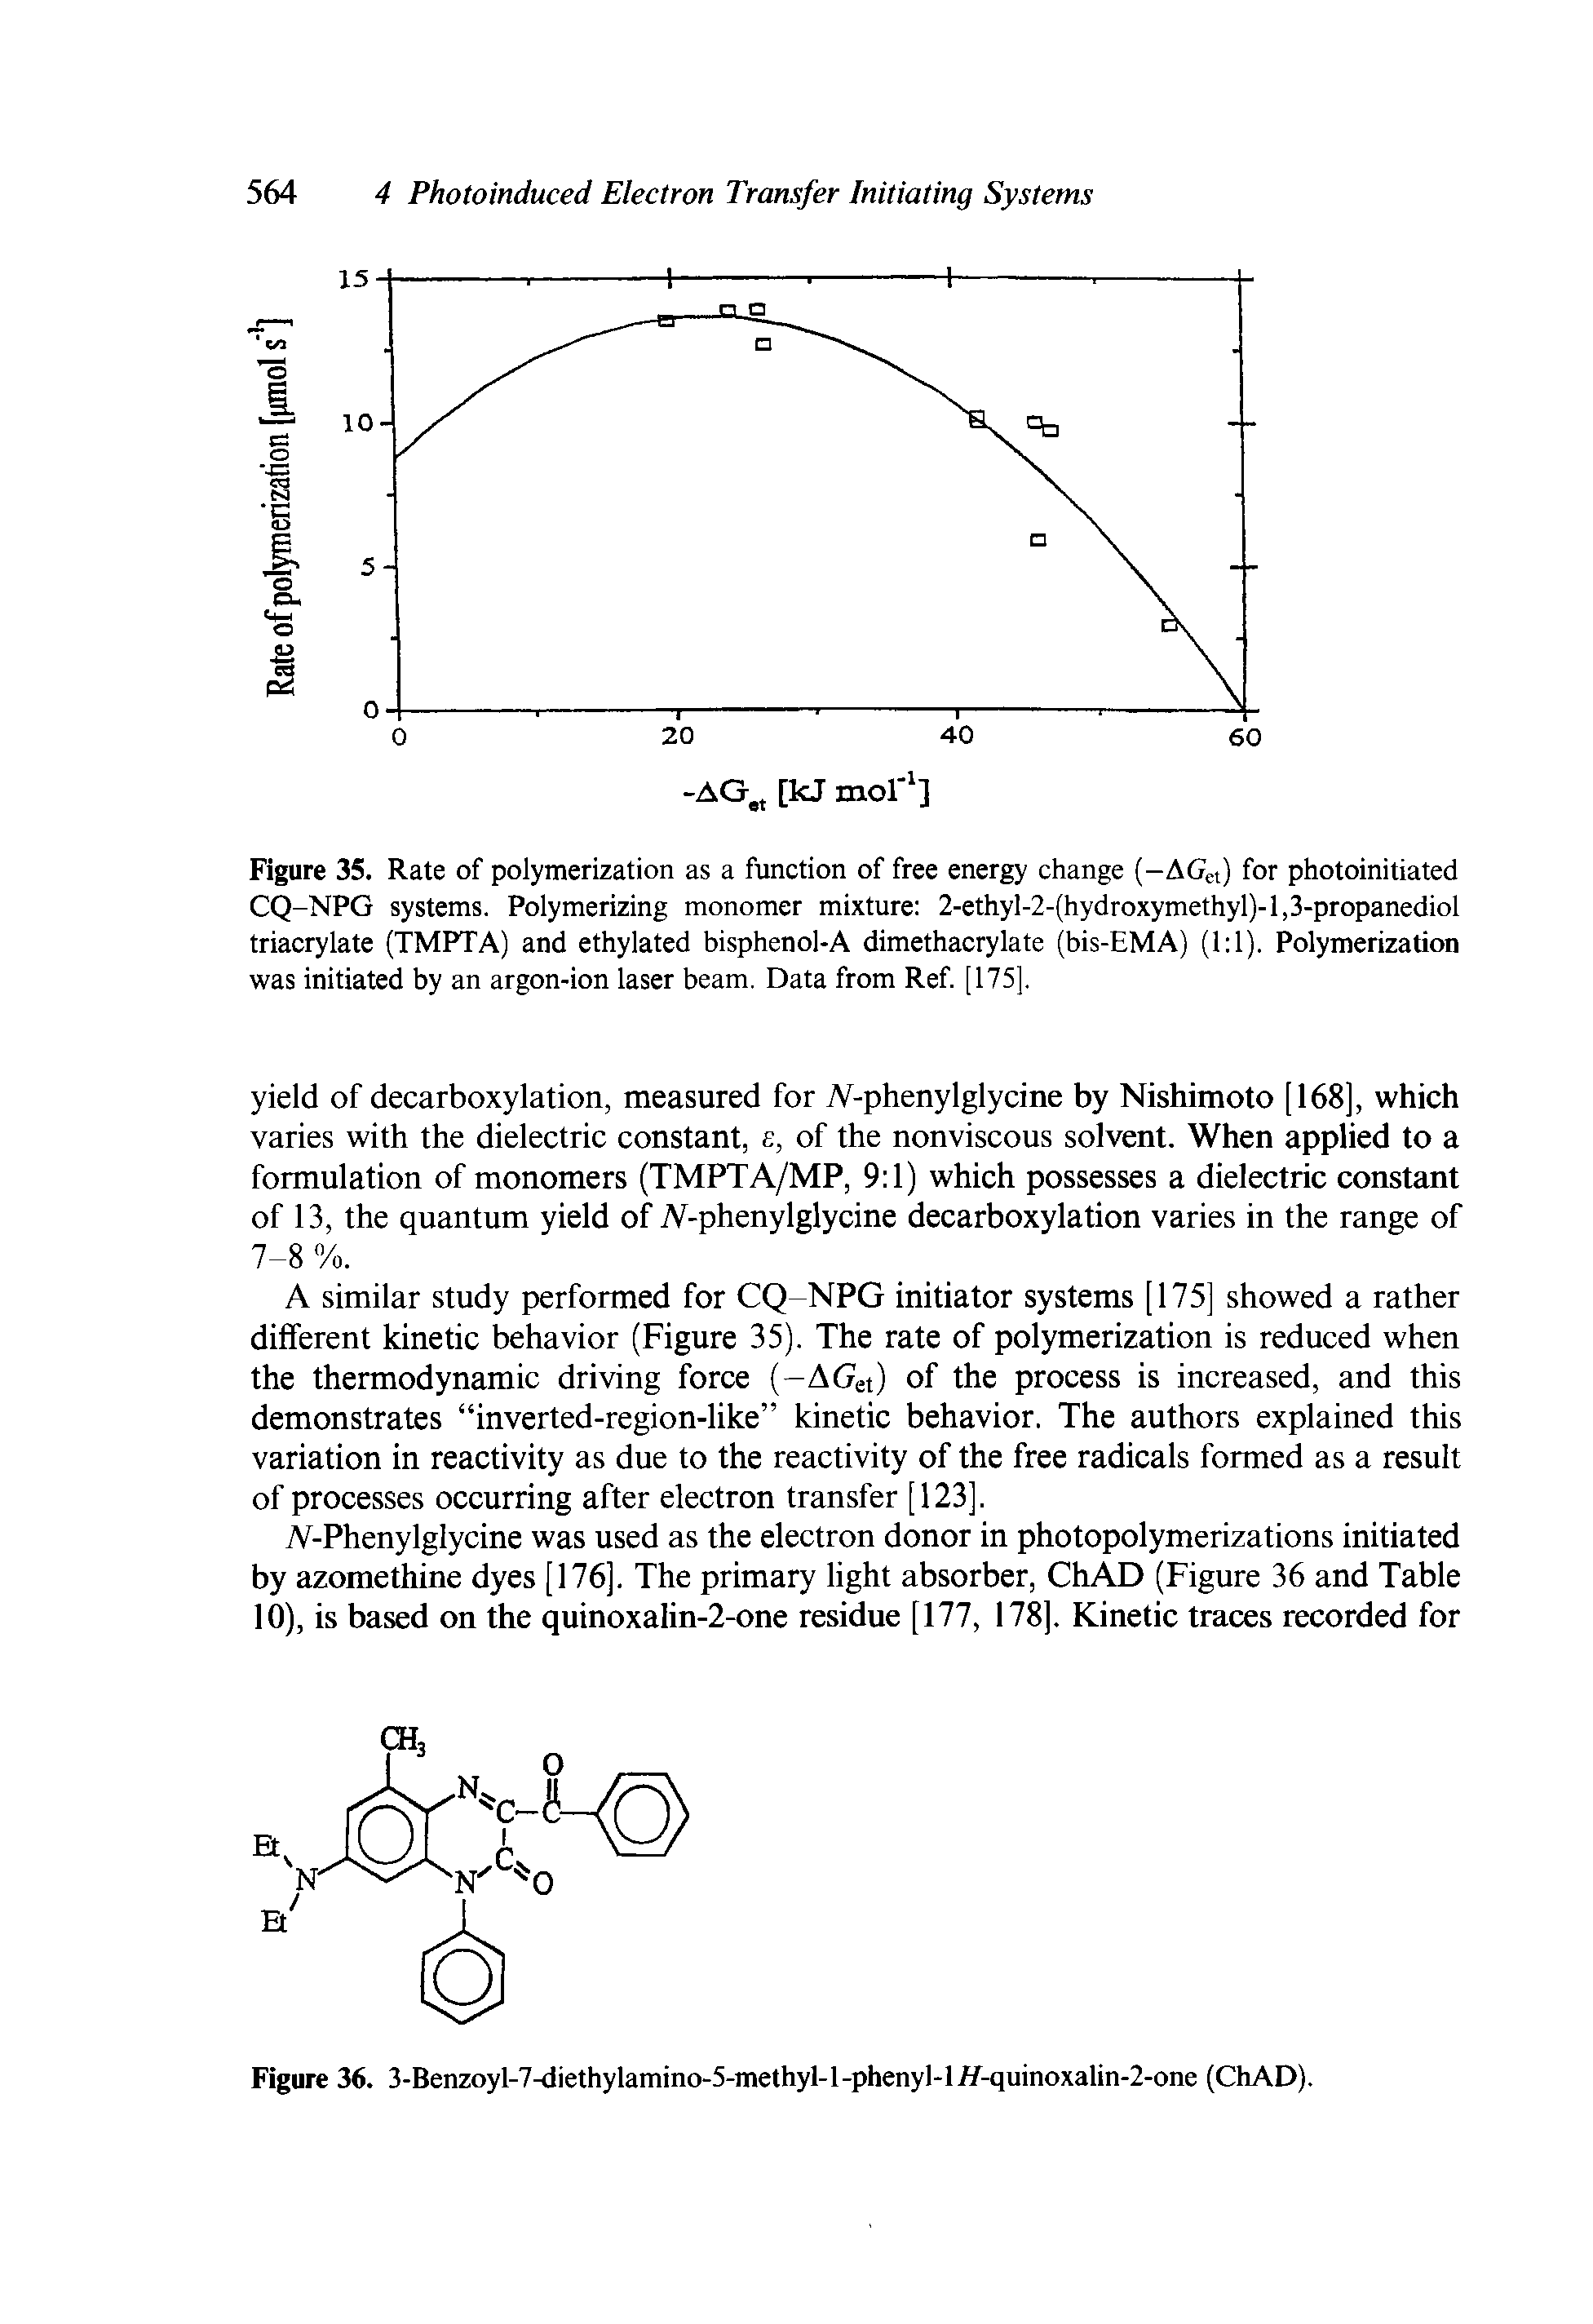 Figure 35. Rate of polymerization as a function of free energy change (-AGet) for photoinitiated CQ-NPG systems. Polymerizing monomer mixture 2-ethyl-2-(hydroxymethyl)-1,3-propanediol triacrylate (TMPTA) and ethylated bisphenol-A dimethacrylate (bis-EMA) (1 1). Polymerization was initiated by an argon-ion laser beam. Data from Ref. [175].